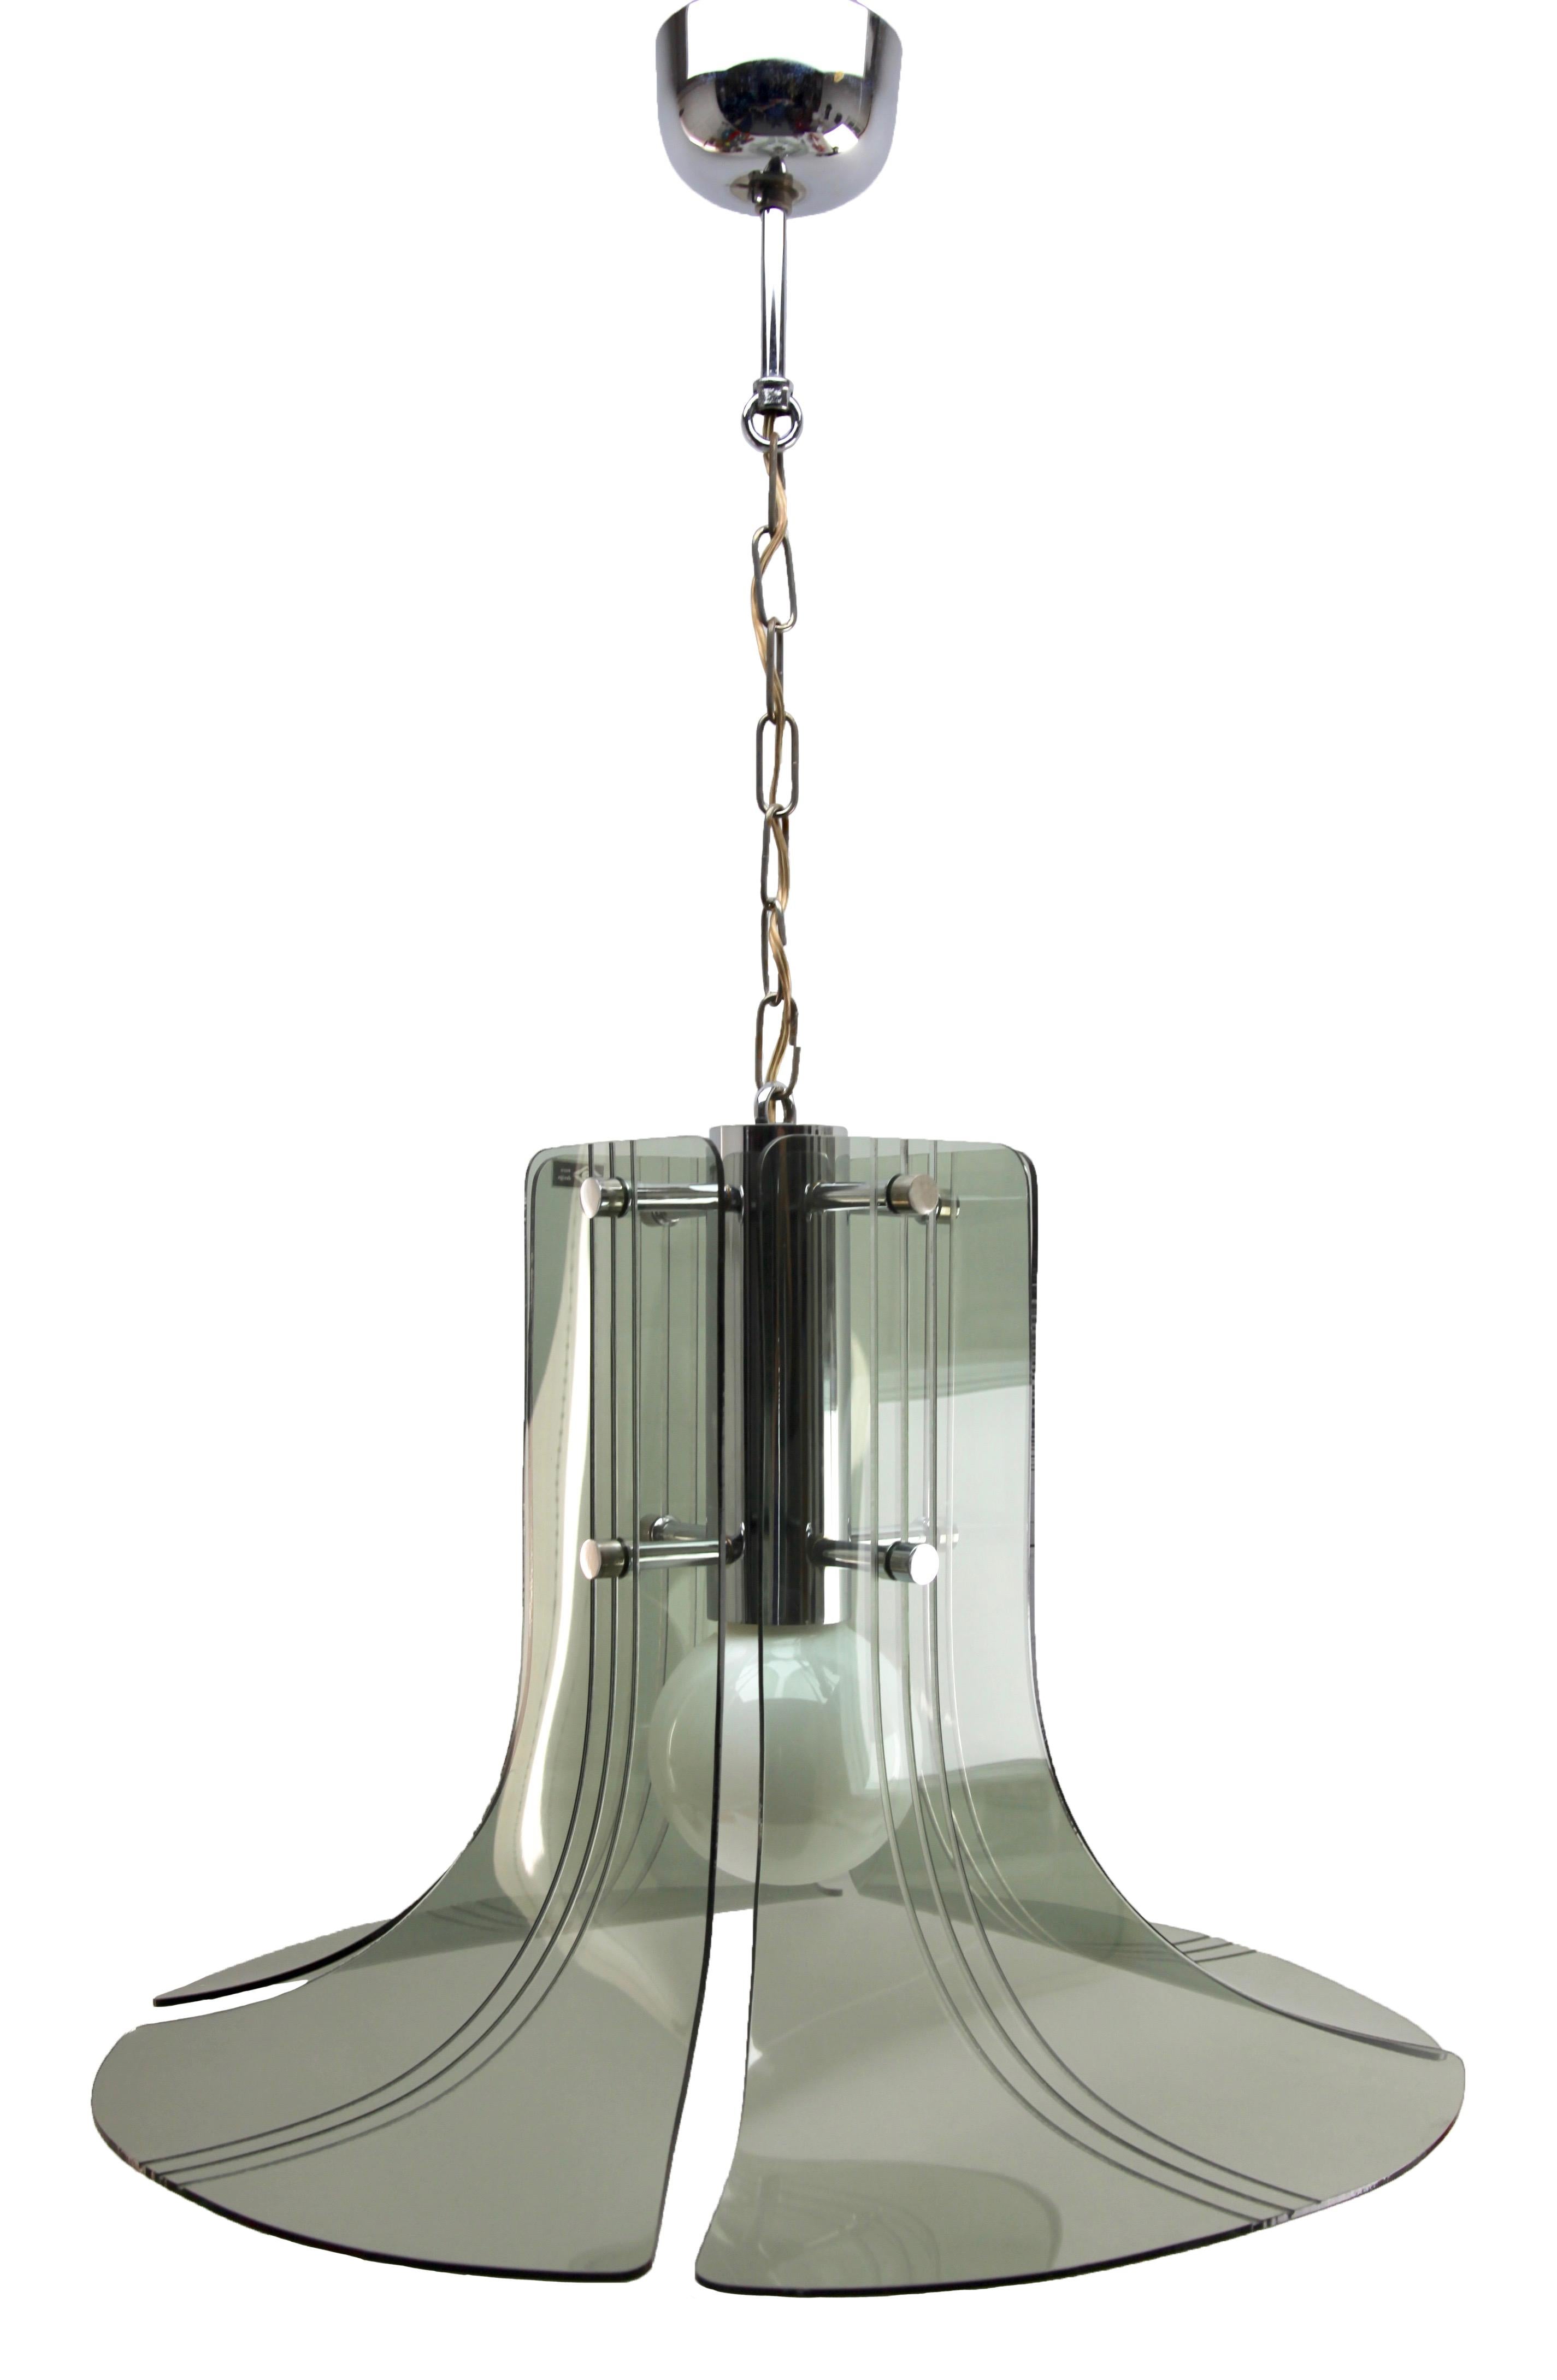 Italian in the style of Mazzega Mid-Century Modern plexs glass pendant/suspension fixture.

Size shade: Height 37 cm 14.56 inch diameter 48 cm 18.89 inch 
On an adjustable chain
As service: We can adjust the lamp height for you in advance if